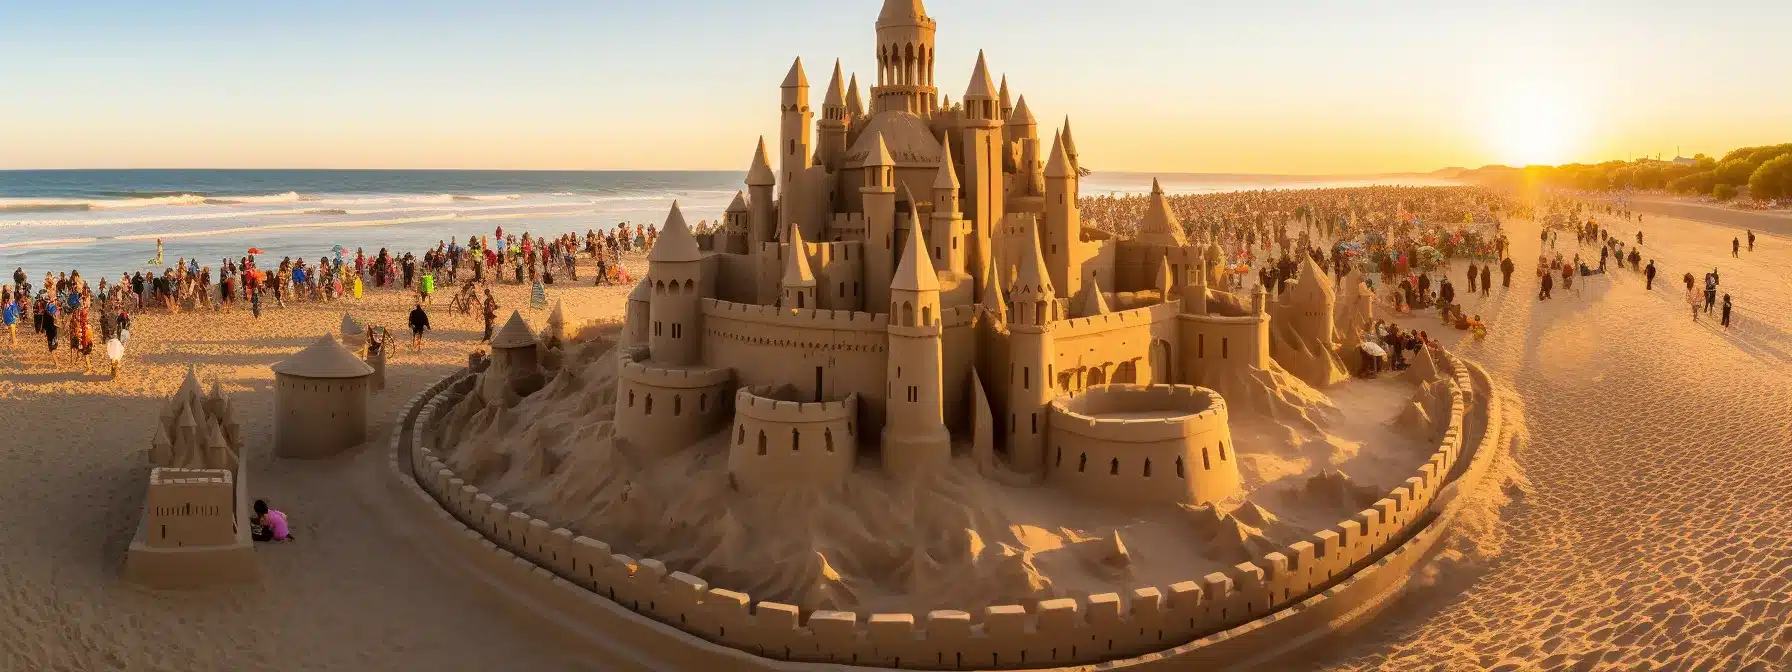 An Elaborate Sandcastle With Towers, Detailing, And A Sprawling Layout Draws In Casual Strollers On The Internet Beach.